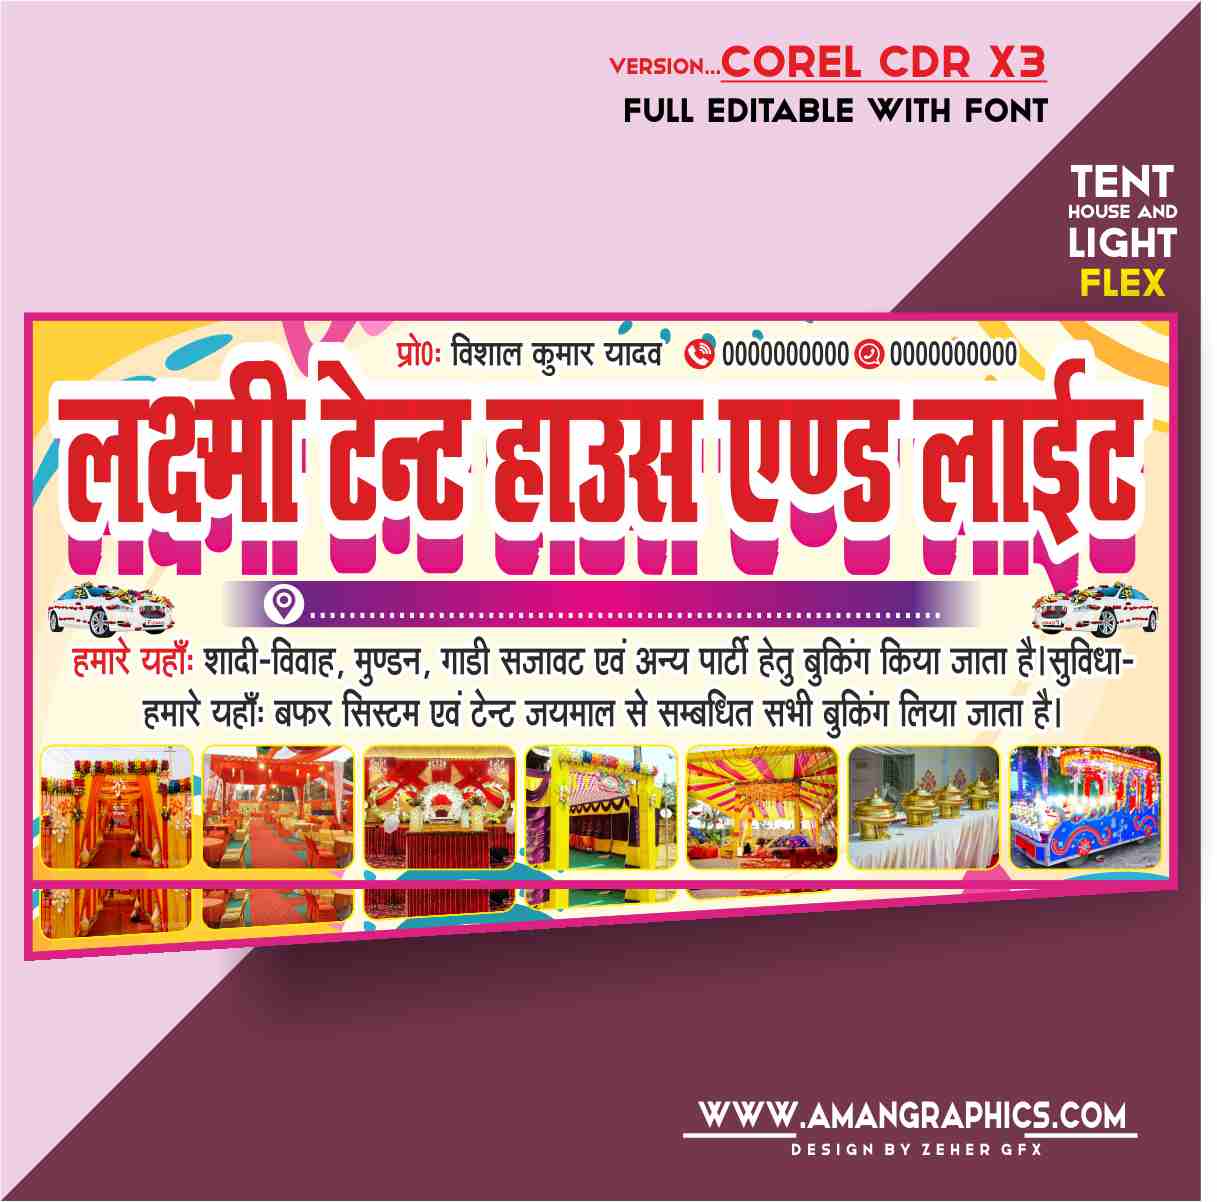 Laxmi Tent House And Light Banner Design Cdr File